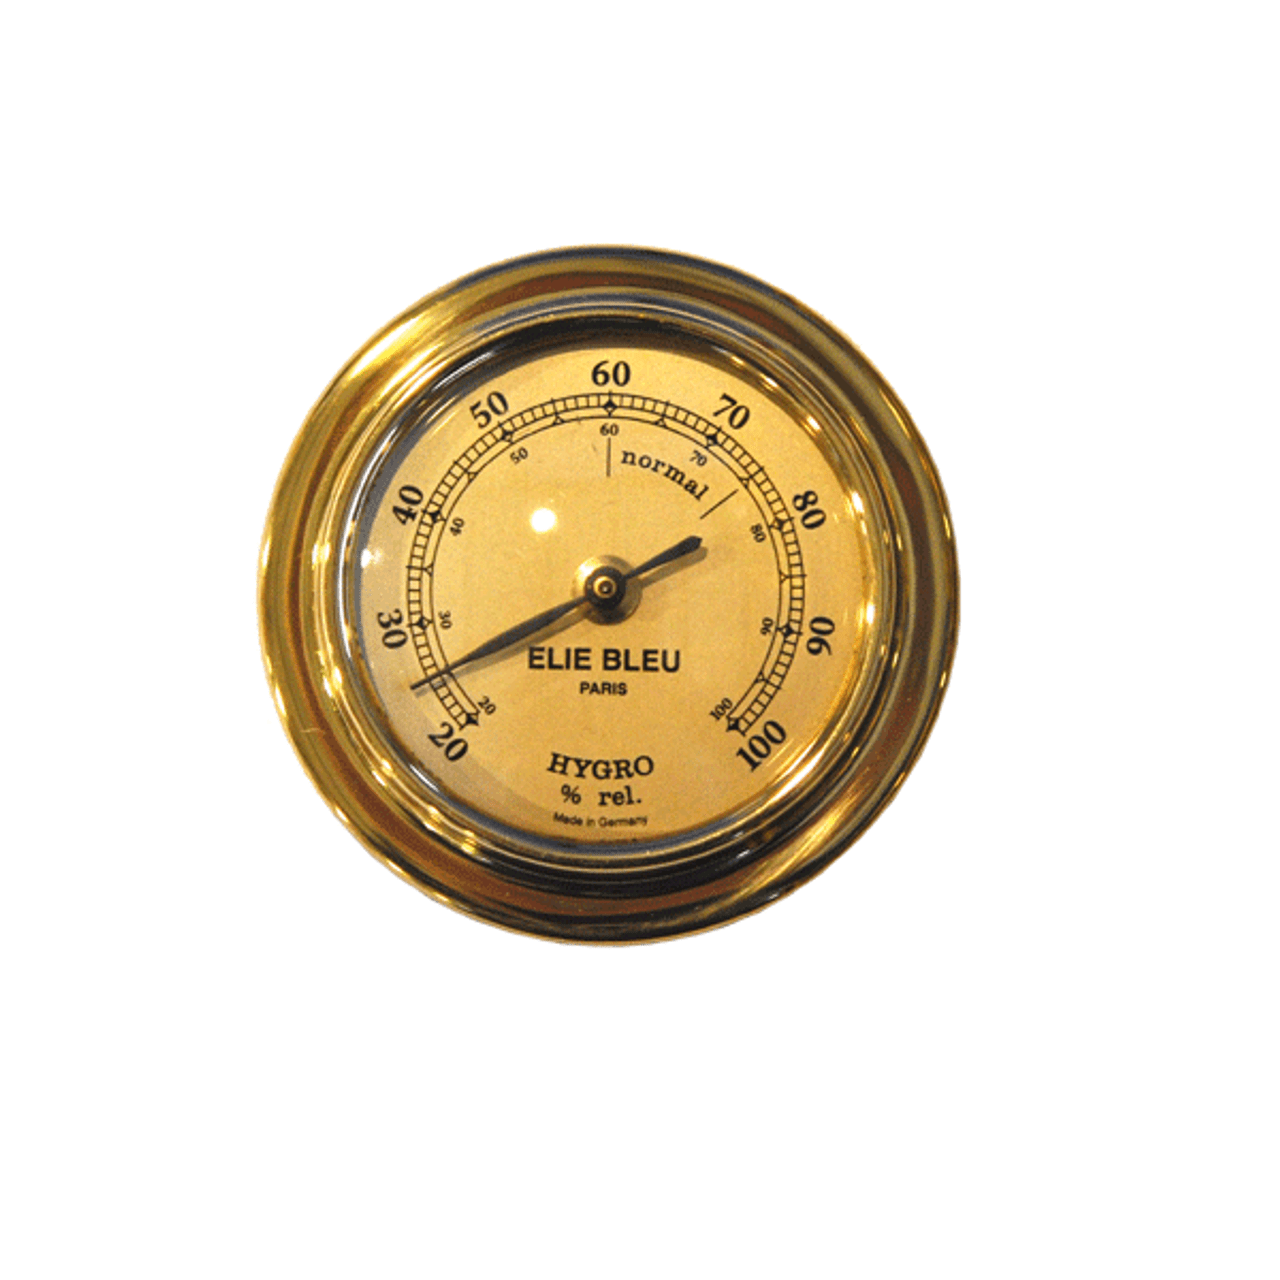 How to Use a Hygrometer